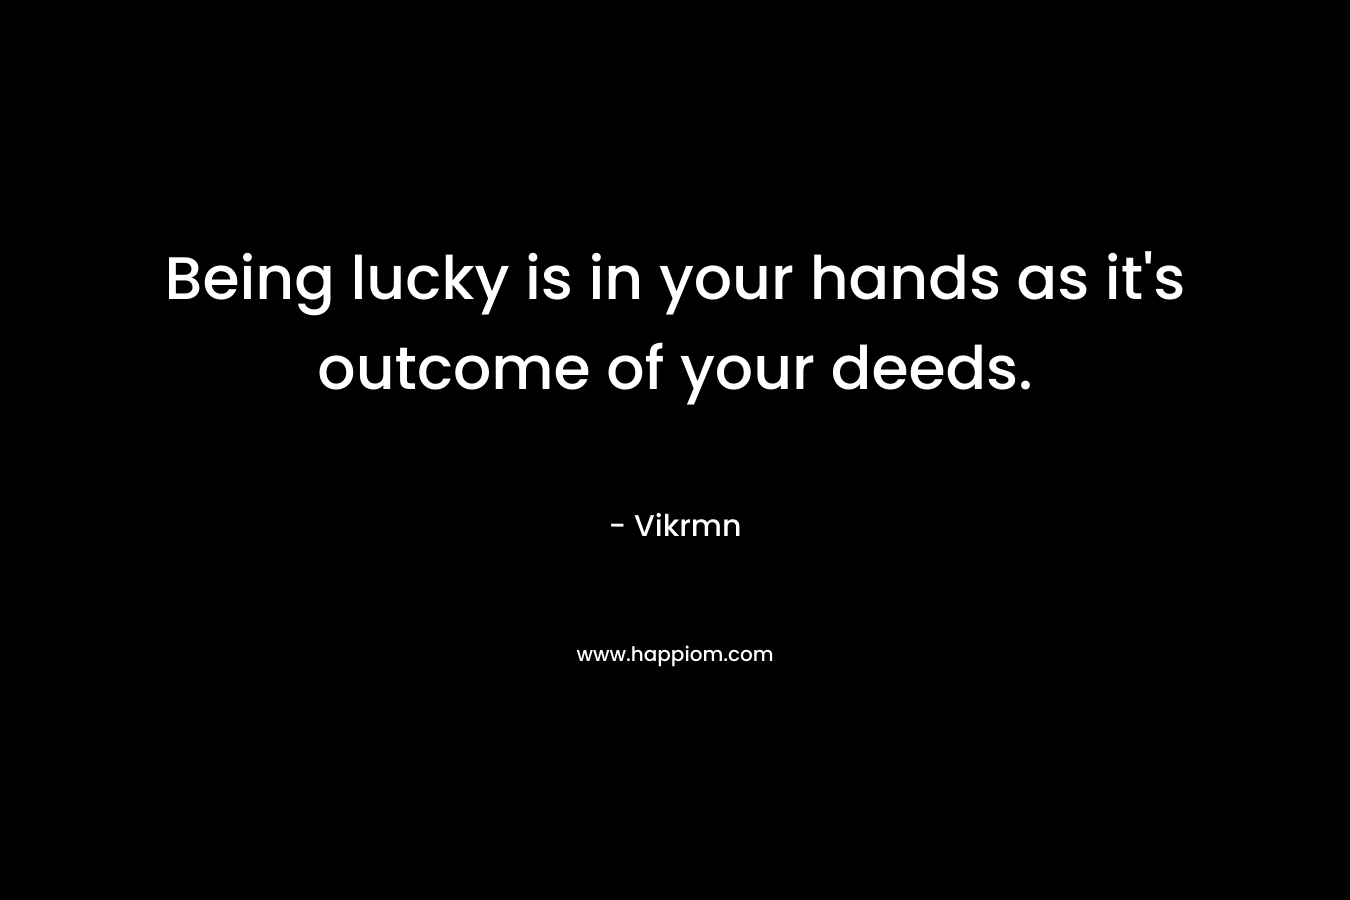 Being lucky is in your hands as it's outcome of your deeds.